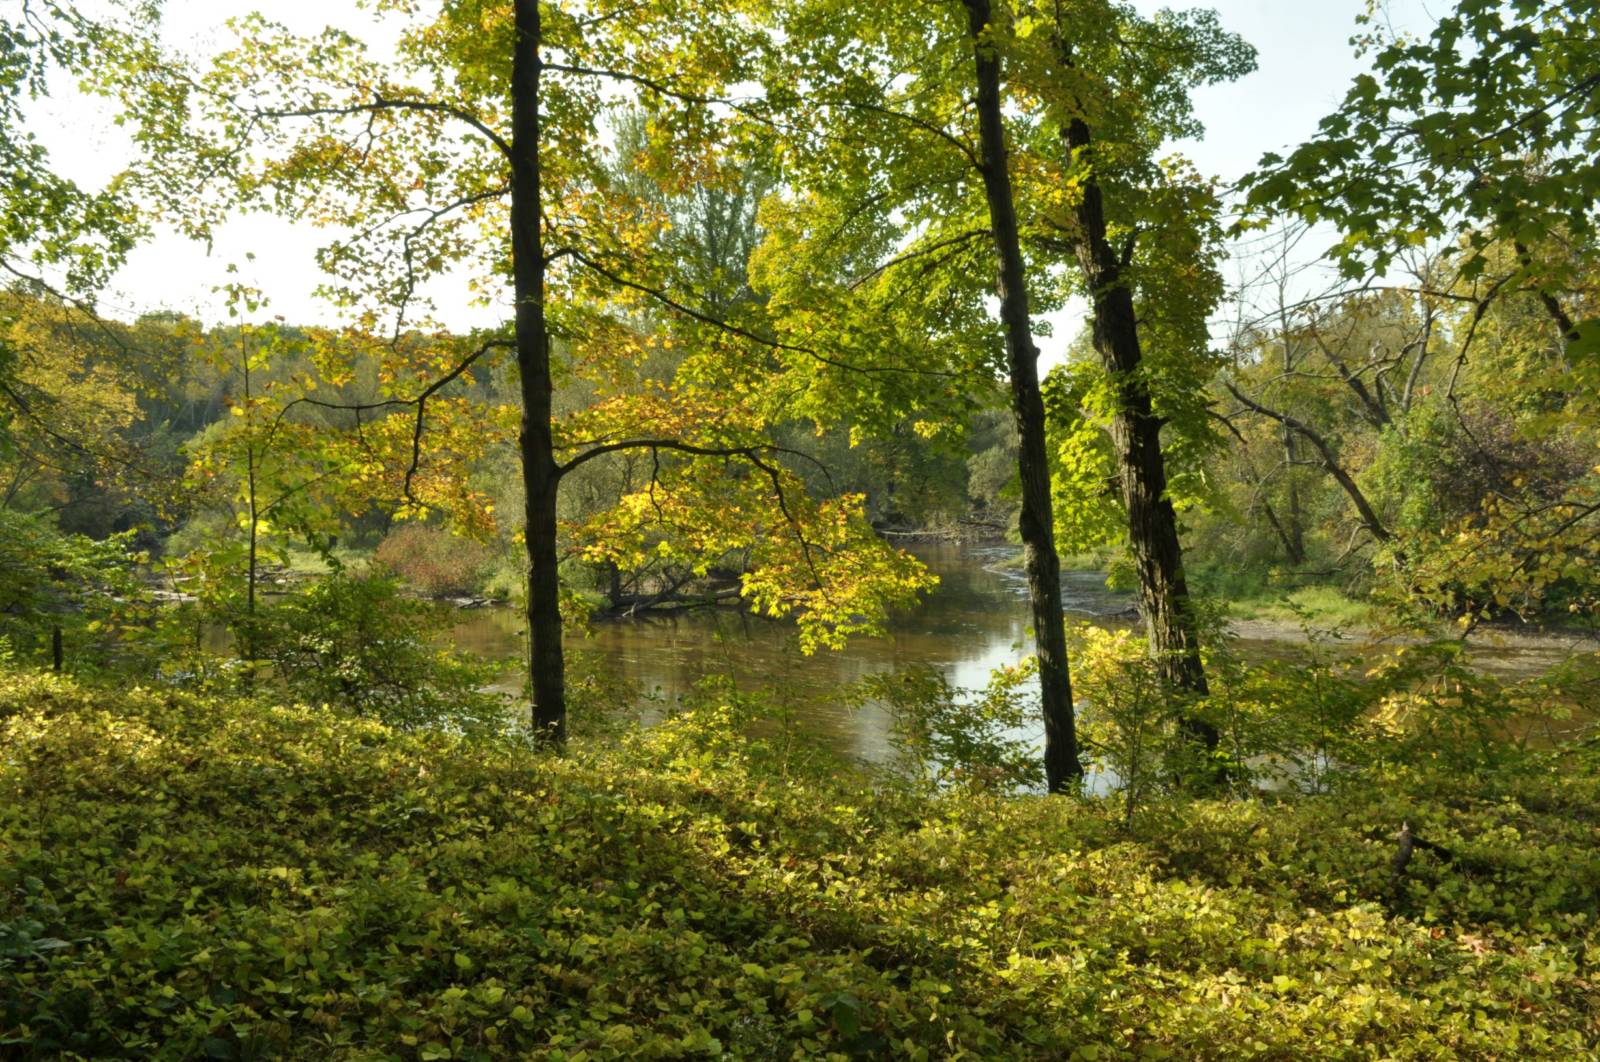 early autumn view from a trail along the Milwaukee River with trees changing color